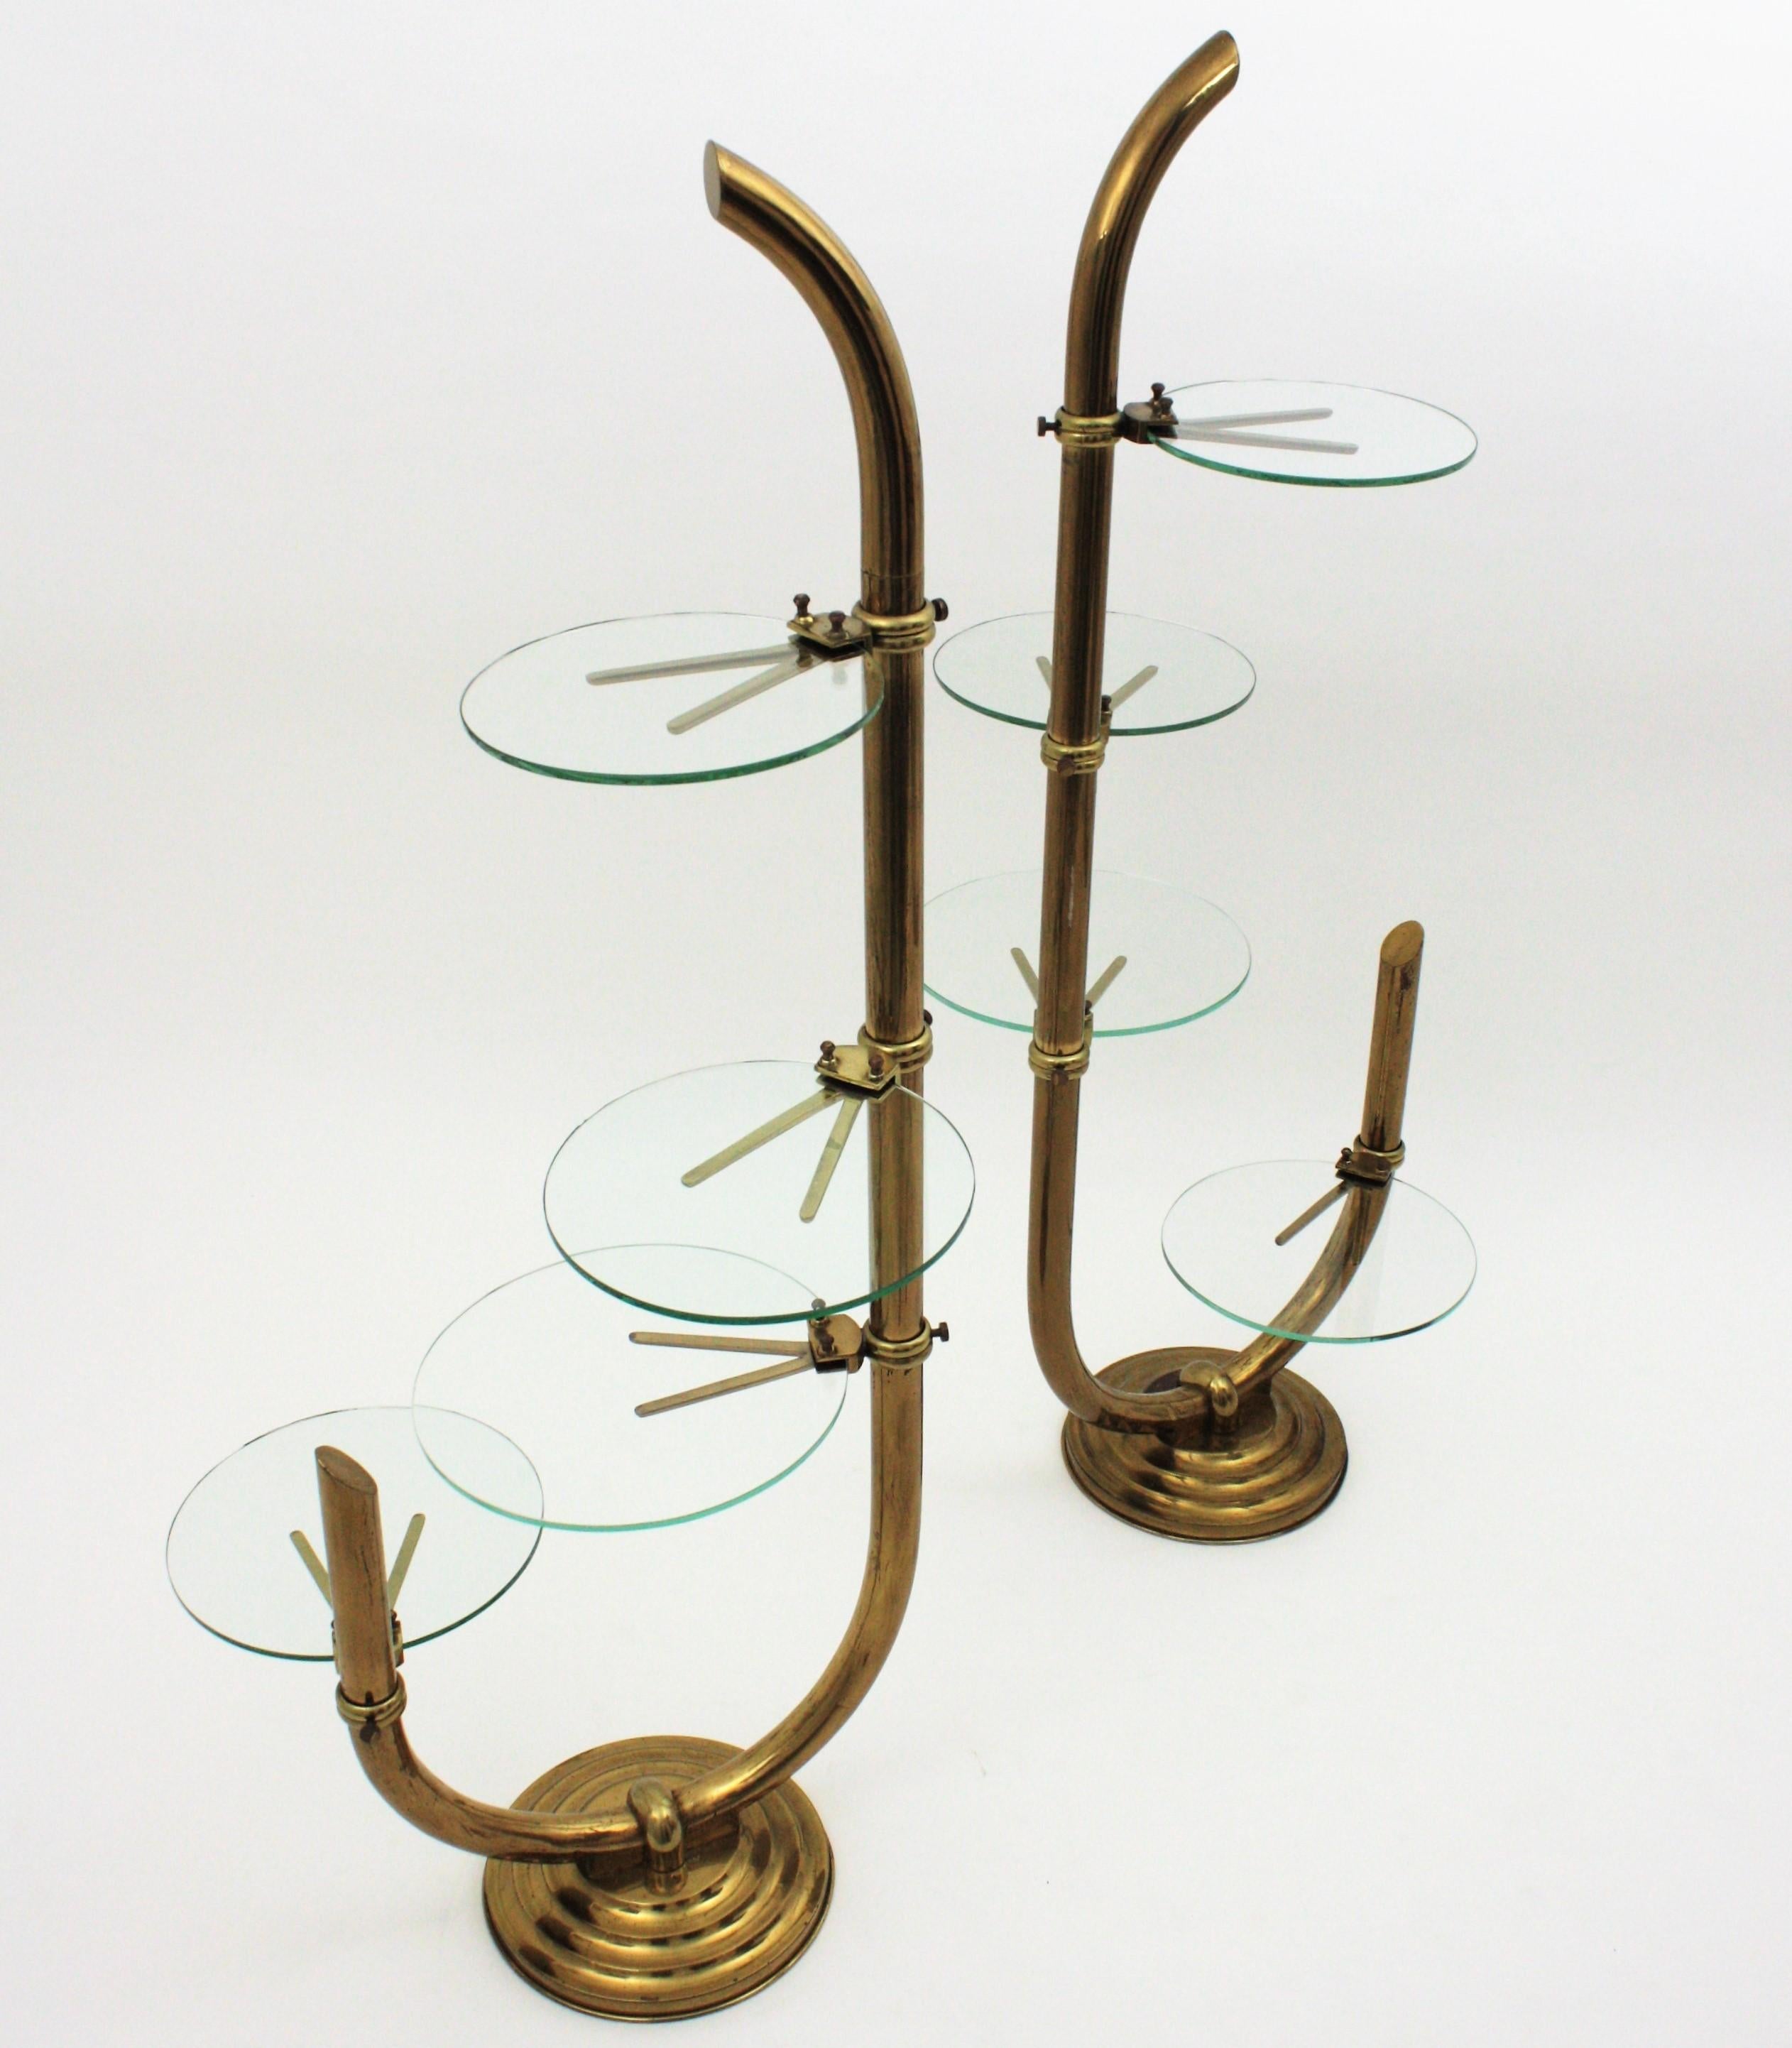 Art Deco Brass Floor Shop Display Stands / Swivel Etageres with Shelves in Glass 2